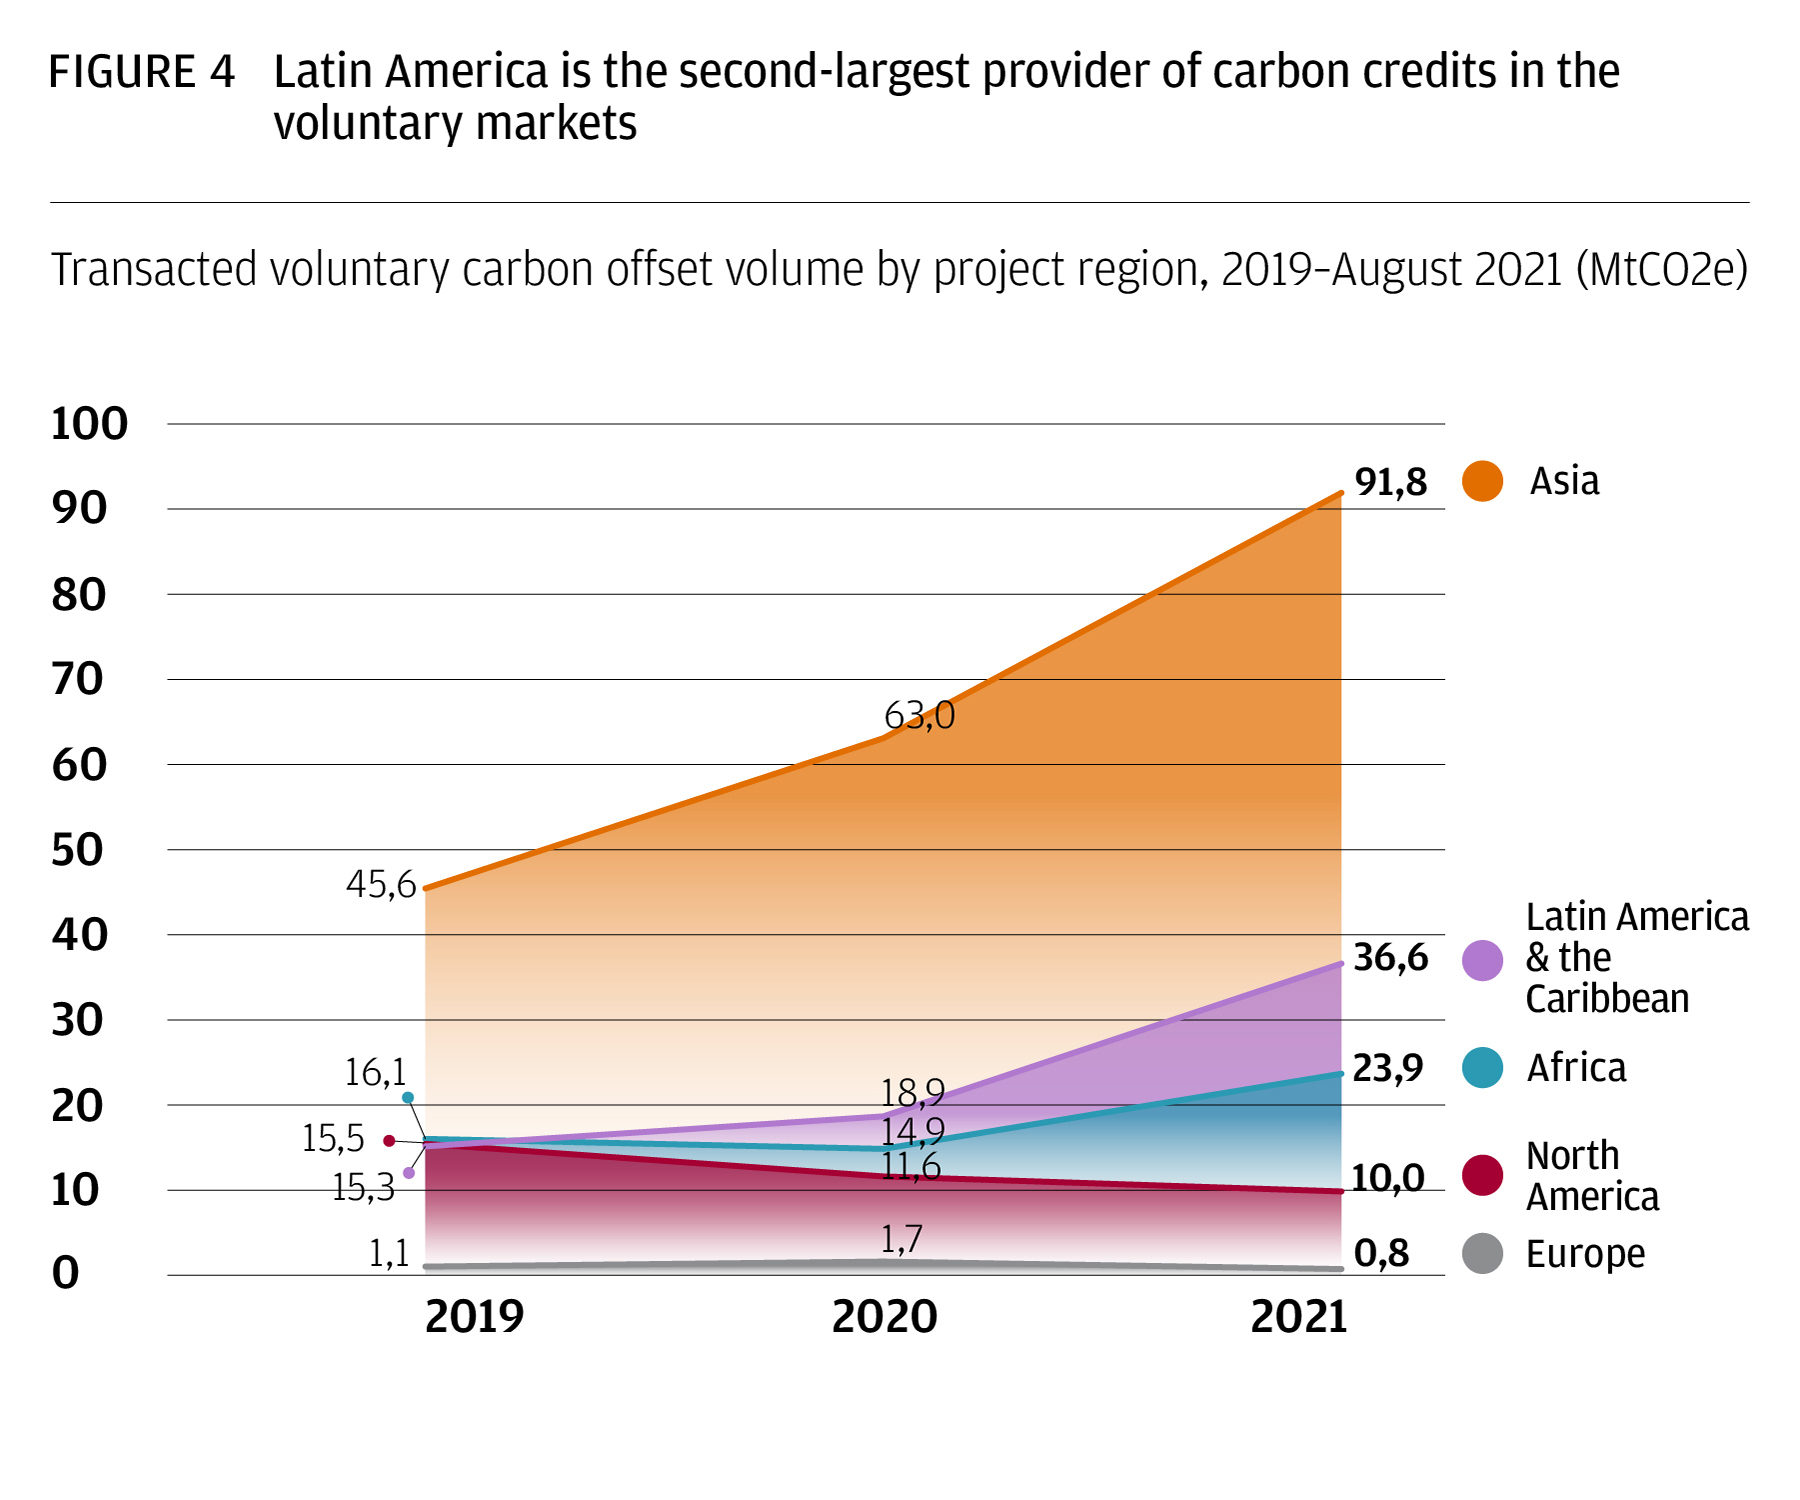 Figure 4 depicts the voluntary carbon offset volumen transacted by project region in from 2019 through August of 2021. 